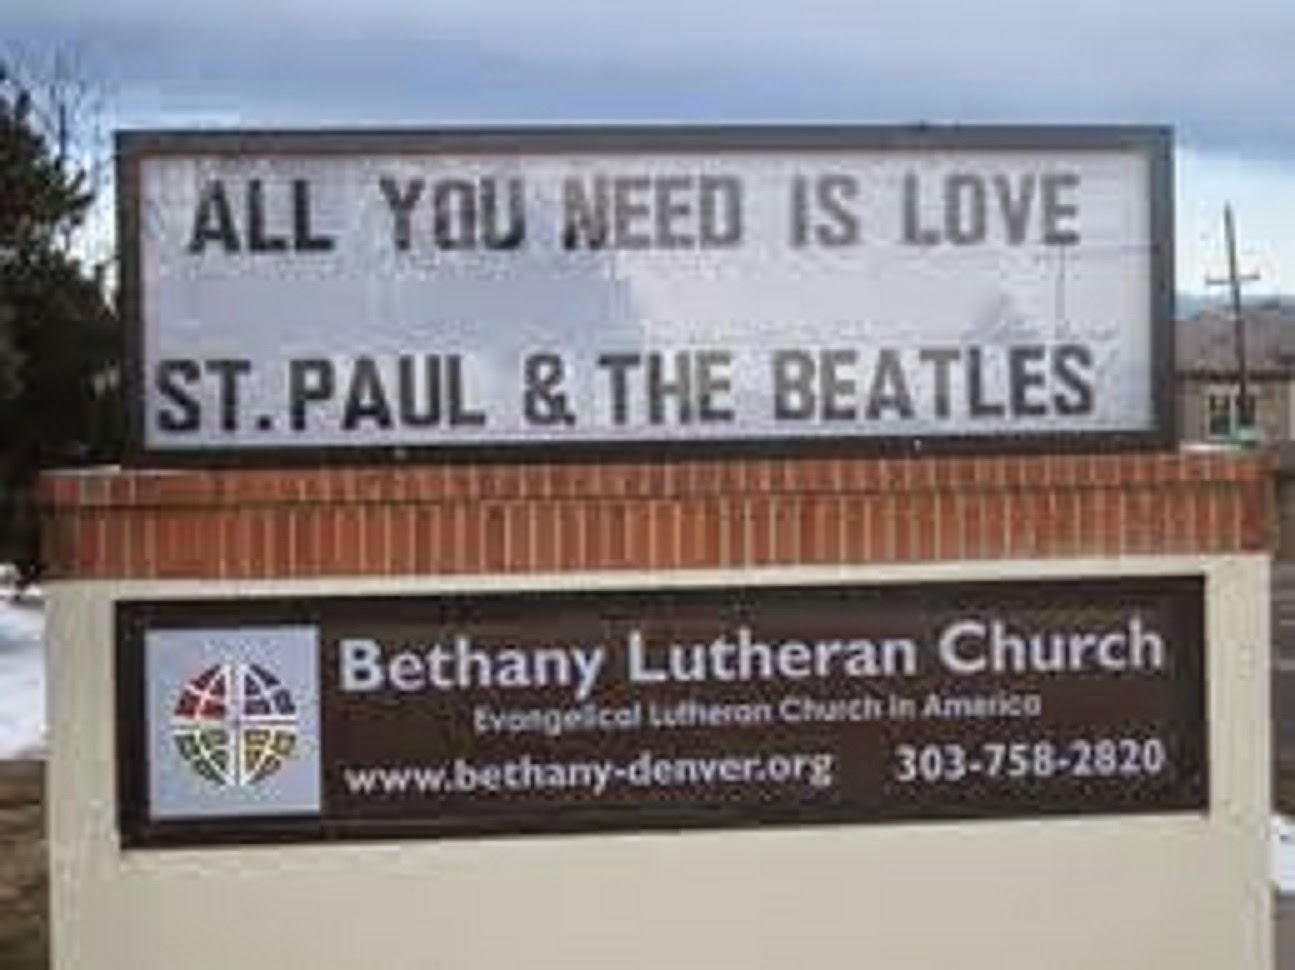 THE GOSPEL ACCORDING TO ST. PAUL AND THE BEATLES